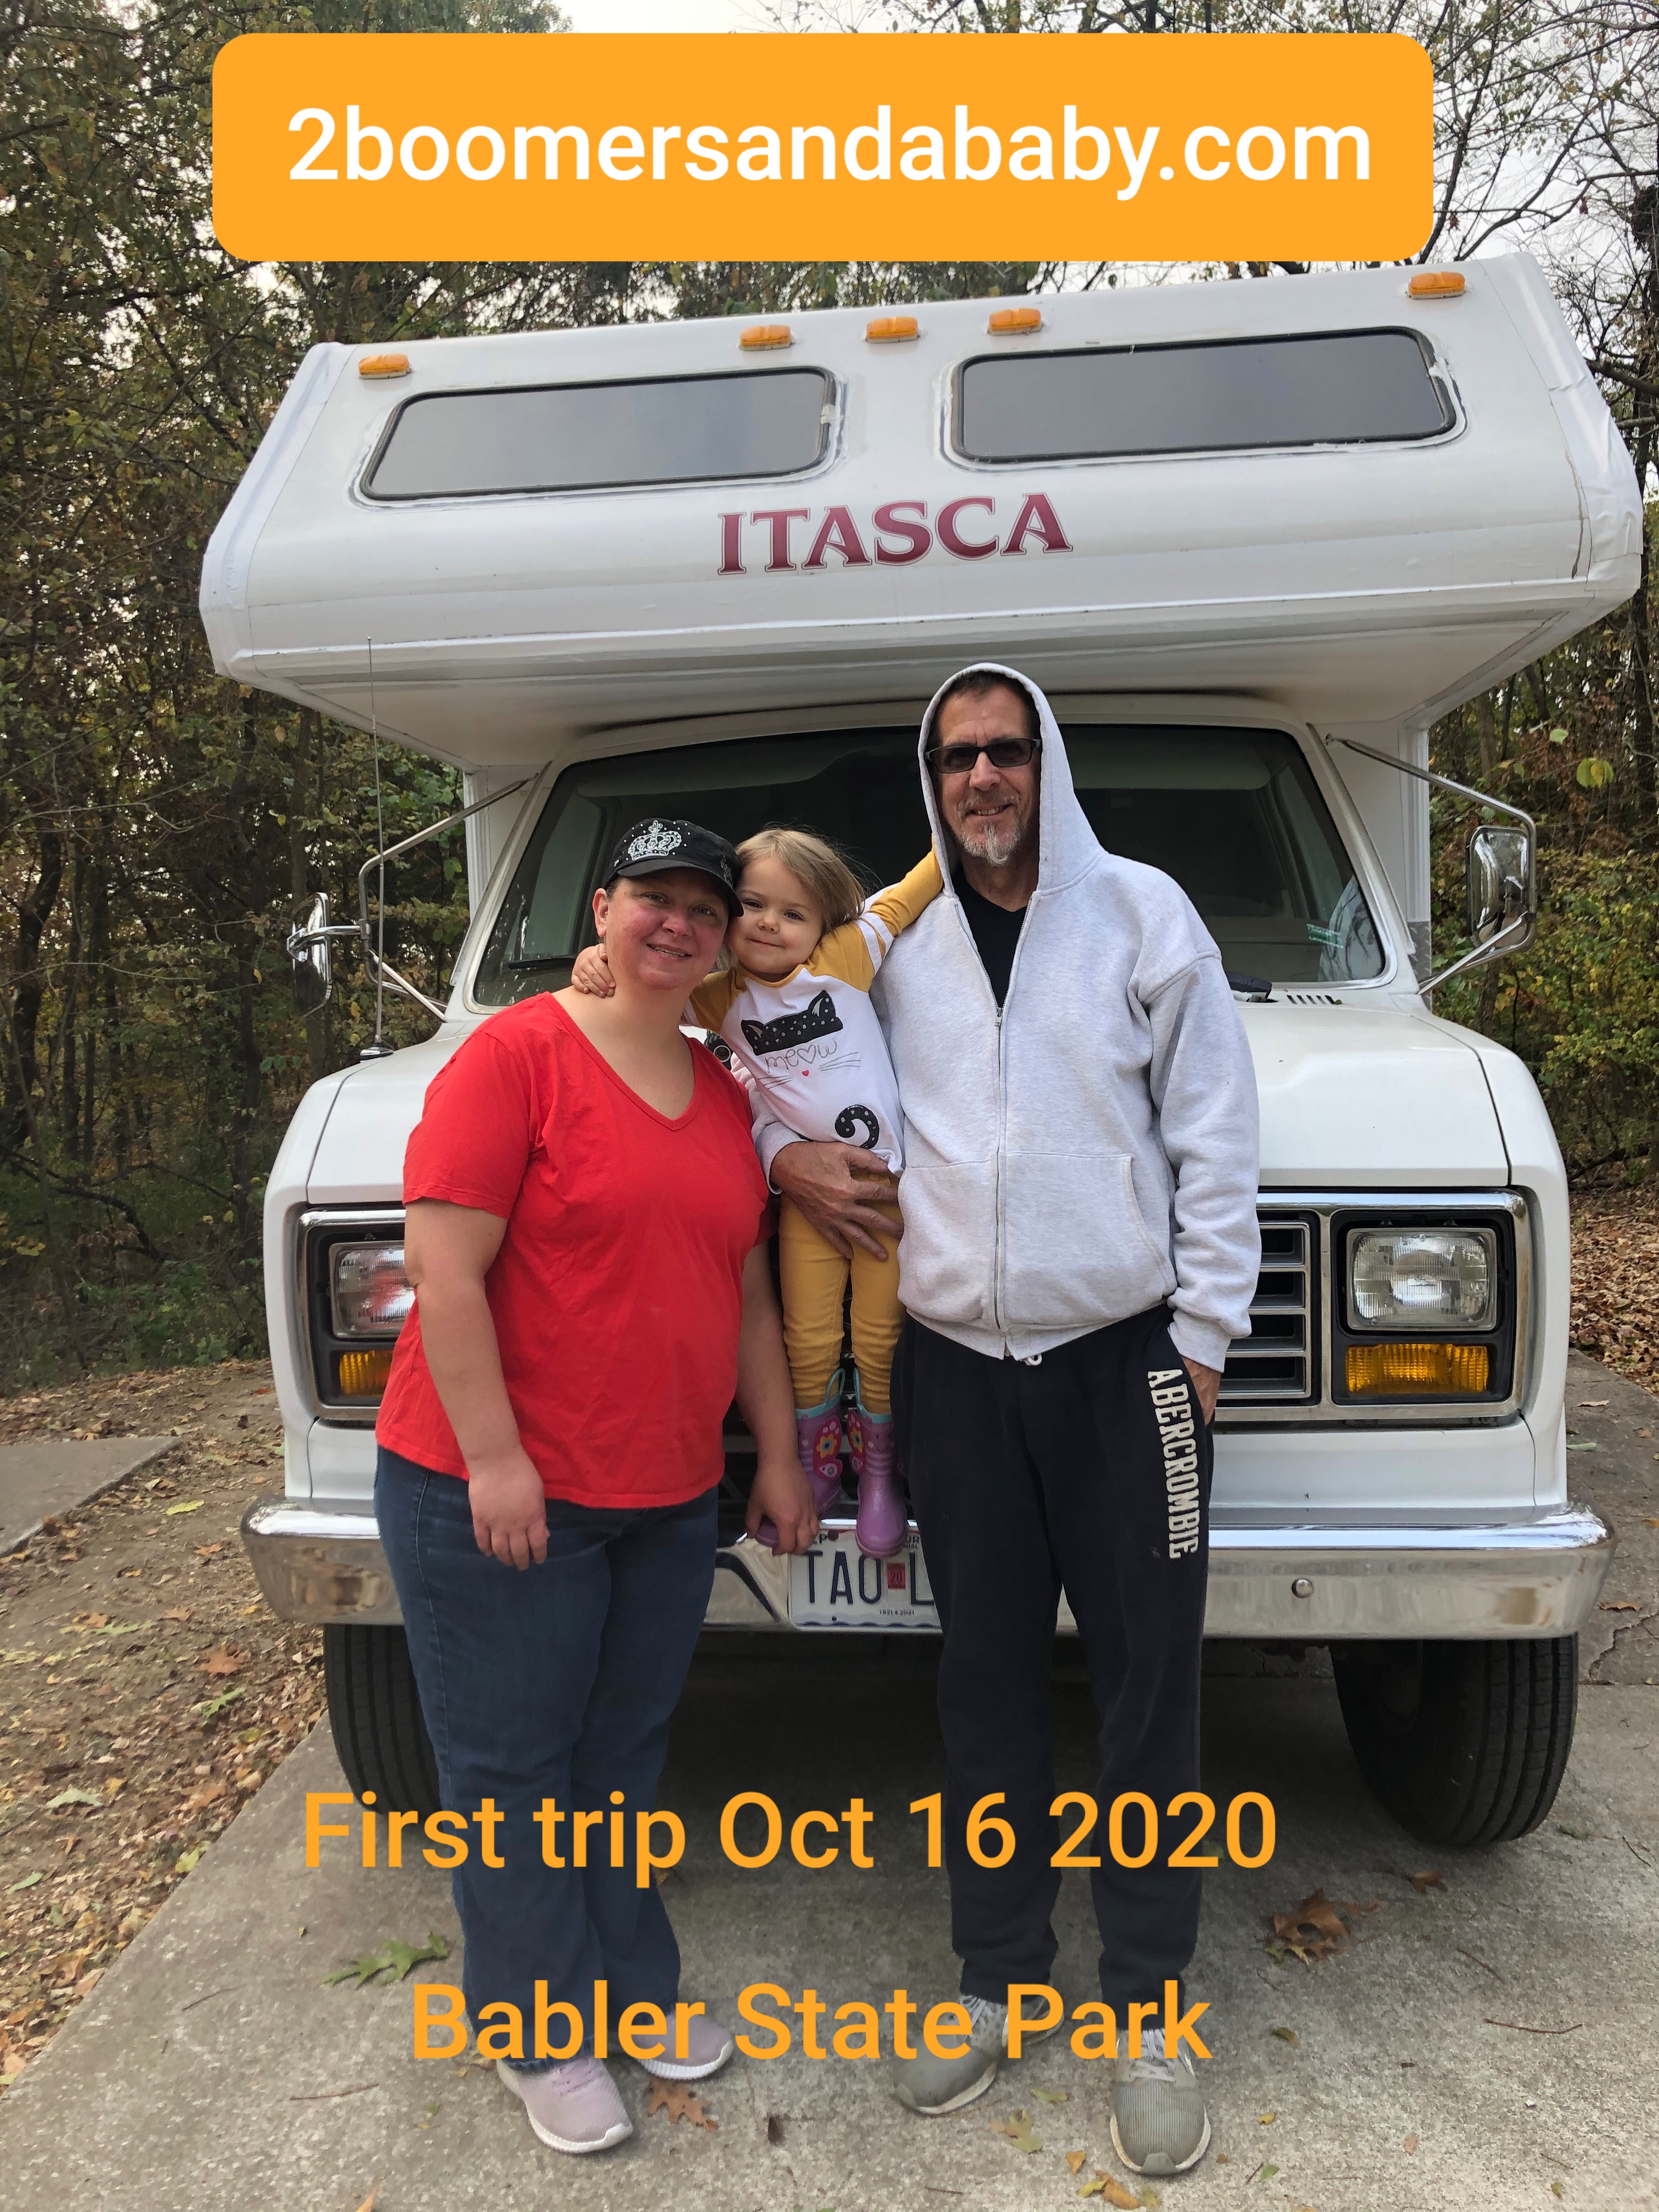 Our first trip in the new to us Itasca class C RV